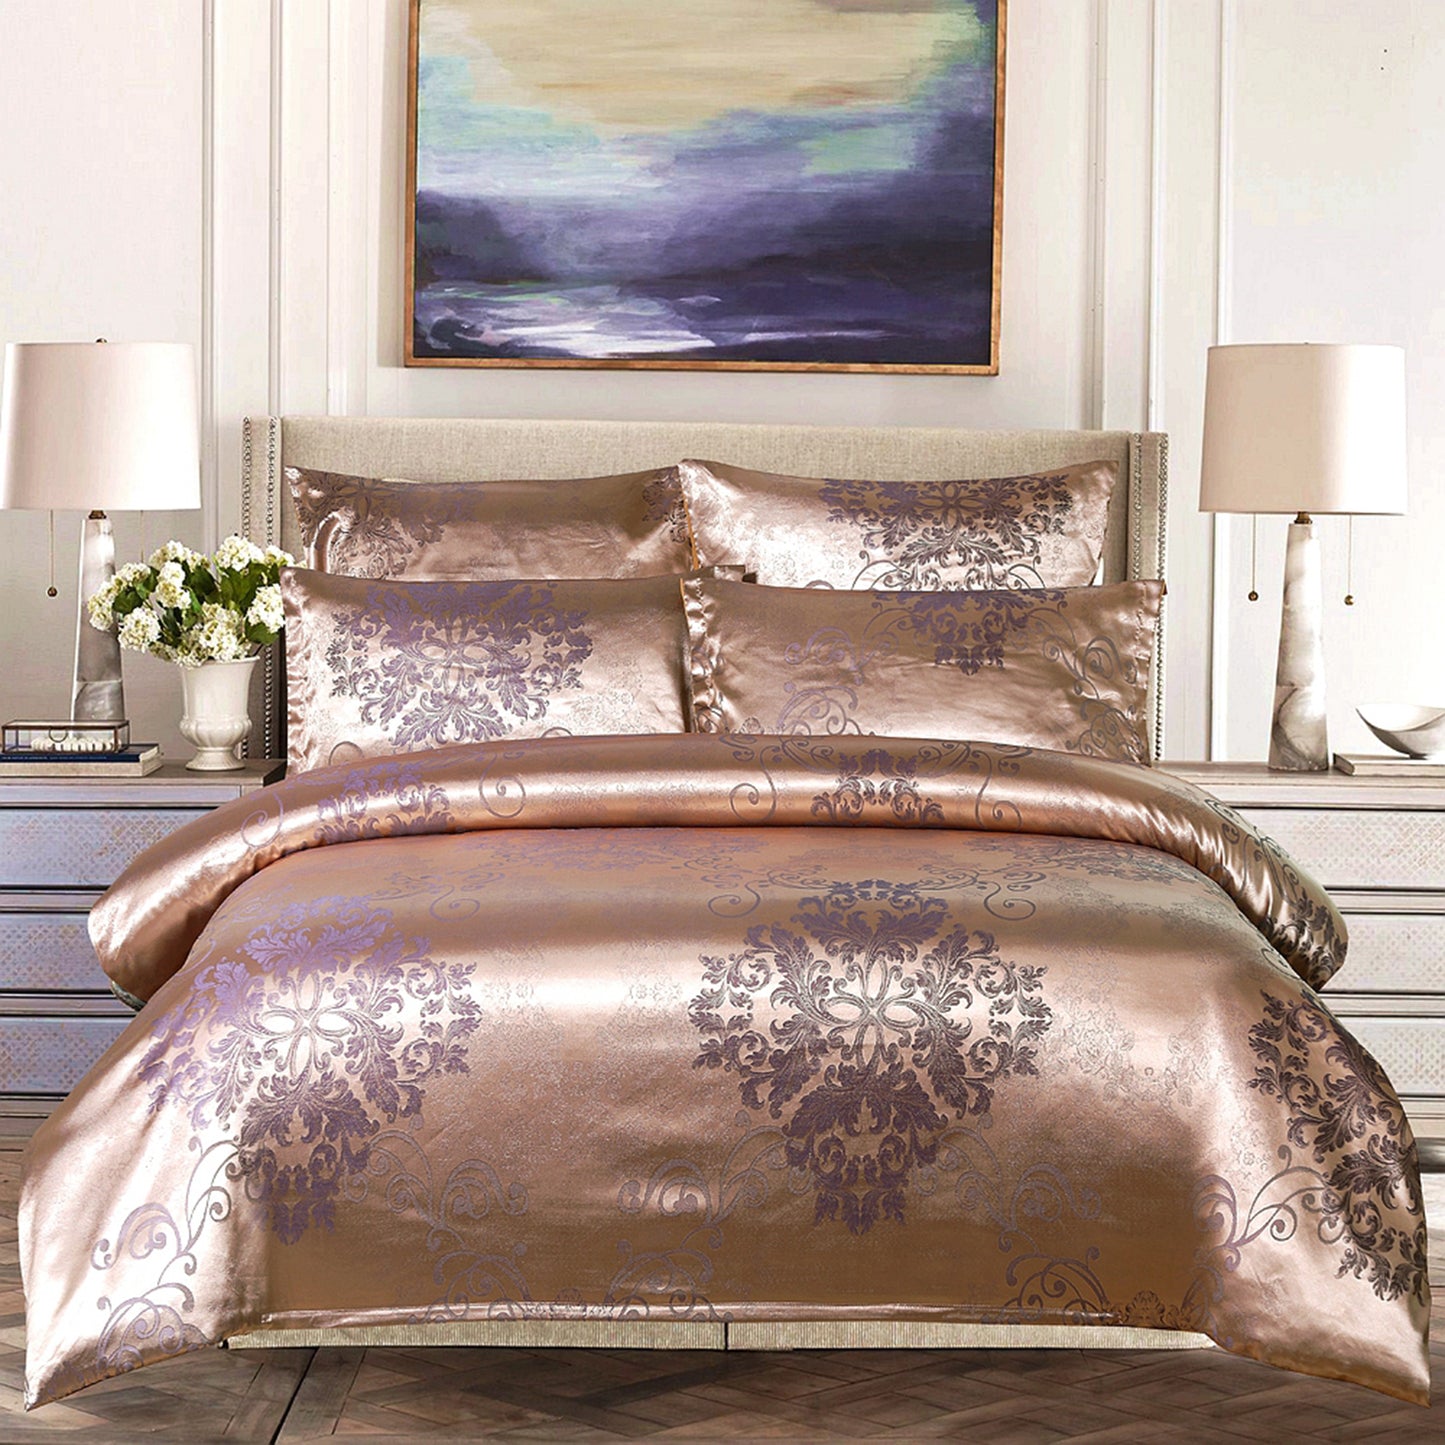 WONGS BEDDING Light Brown Embroidery Satin Craft Duvet Cover Set With 2 Pillow Case